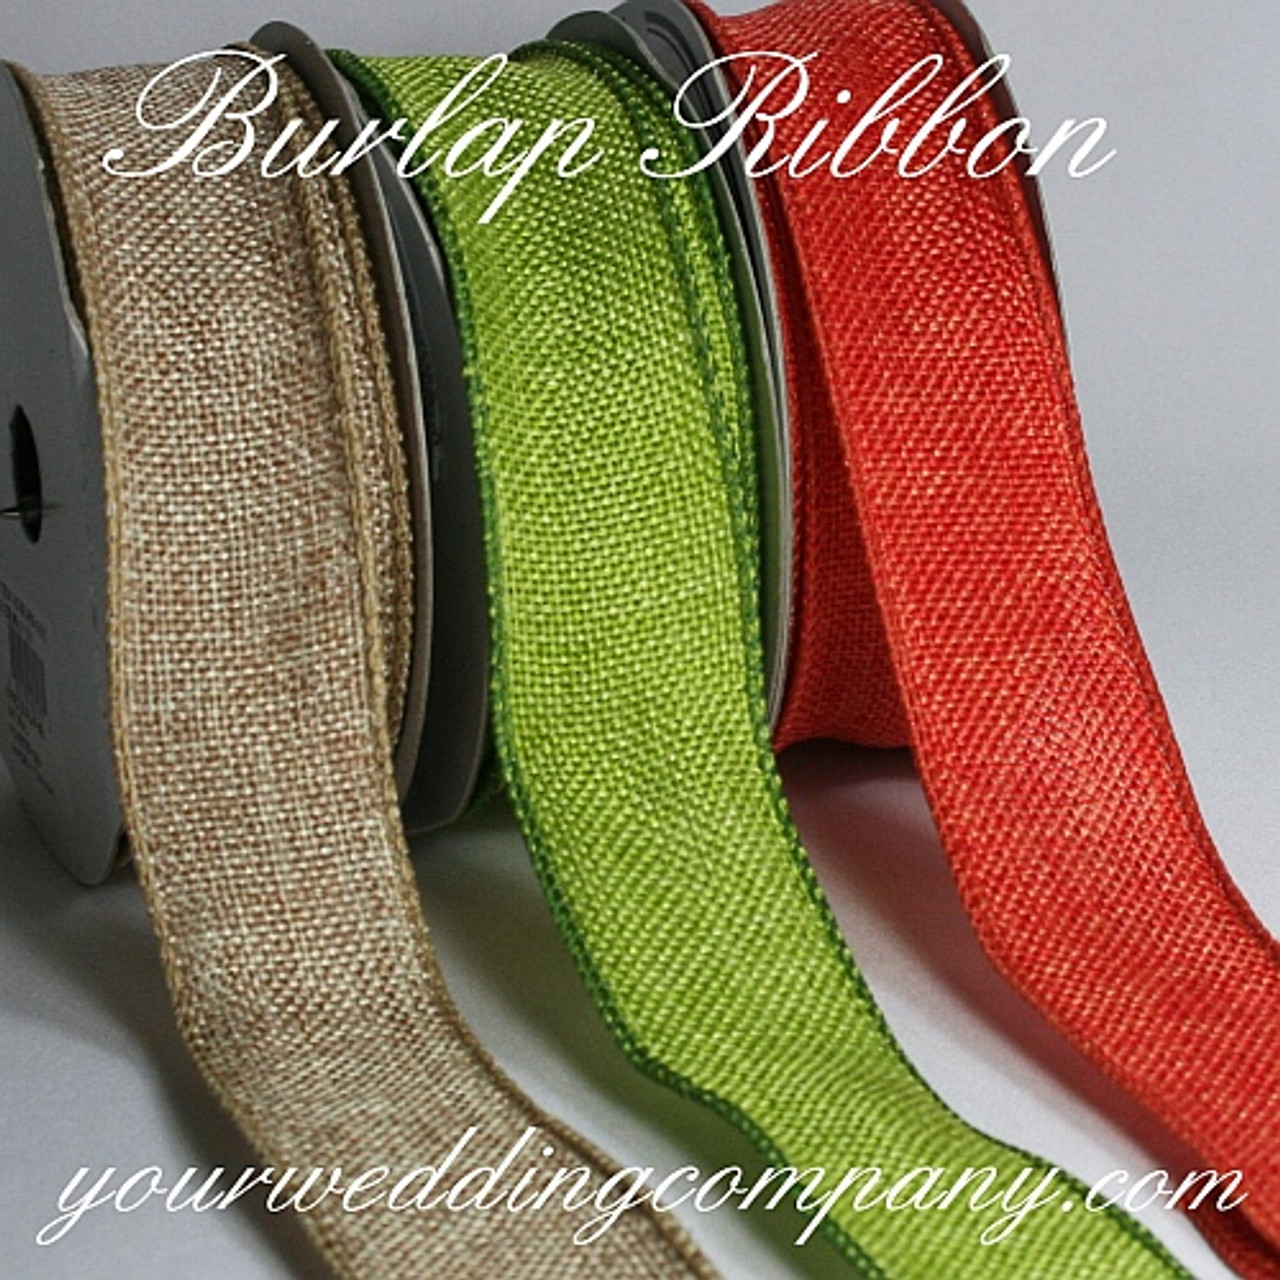 8 inch burlap ribbon - Assorted Colors Green Black Red Natural Ivory